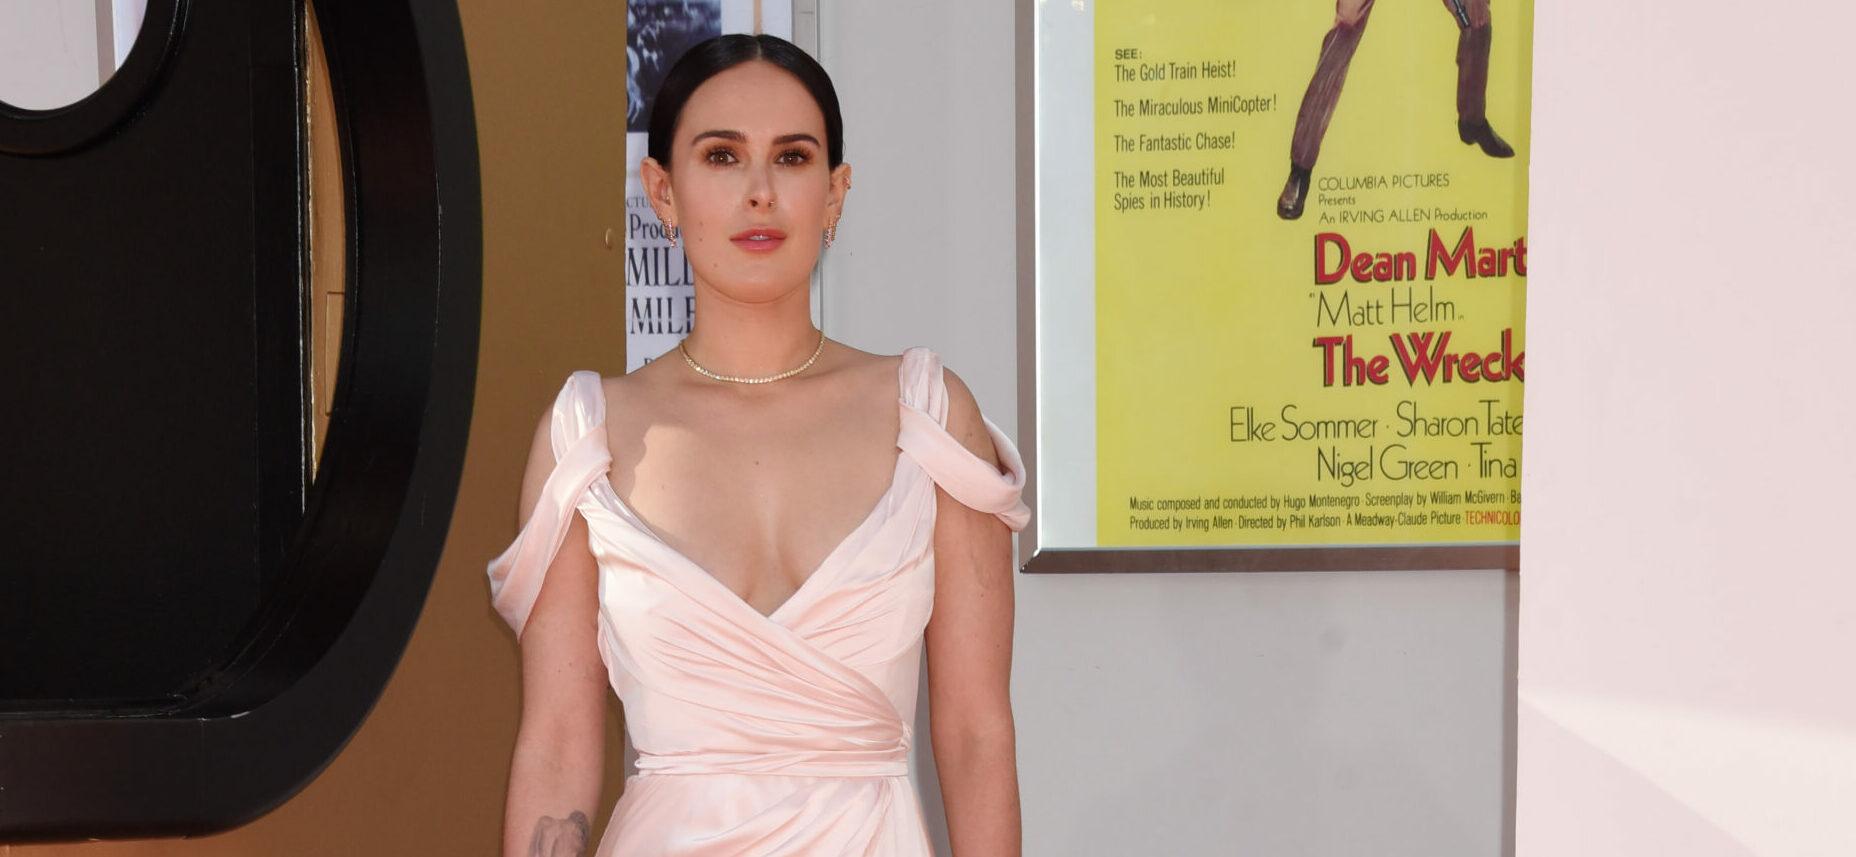 Rumer Willis On How Pregnancy Helped Stop People Pleasing: ‘A Different Operating System’